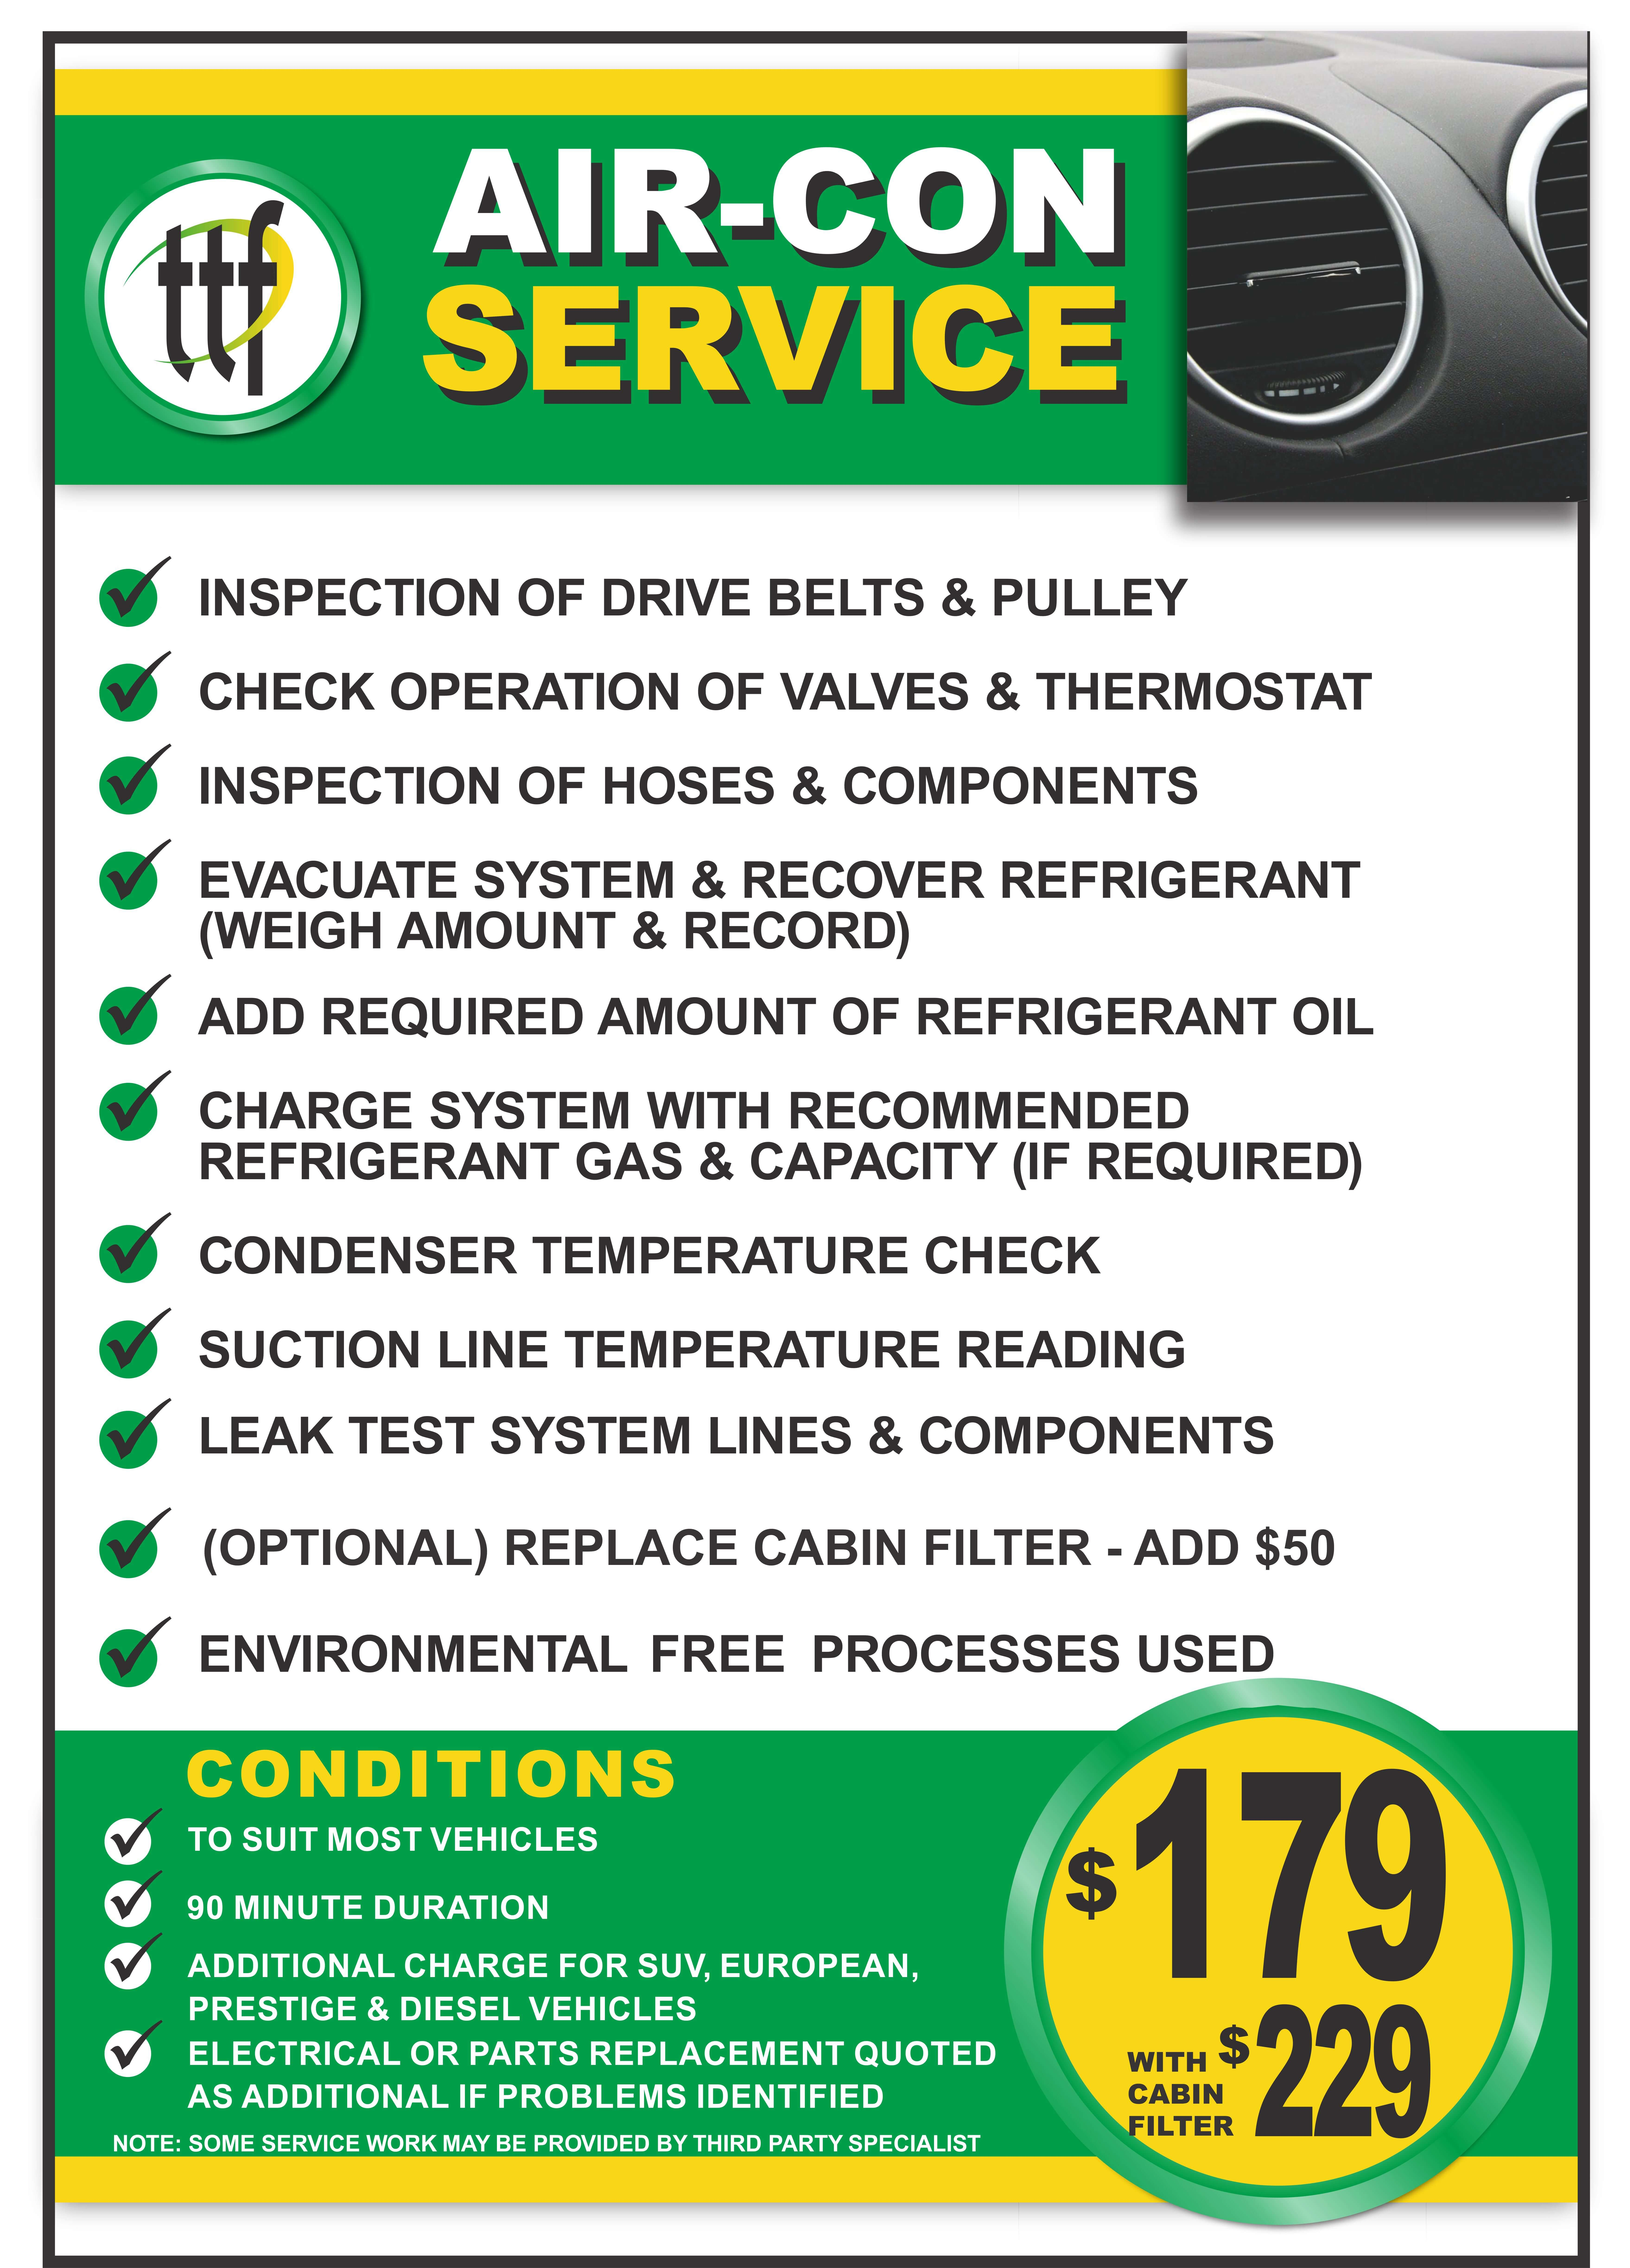 TTF Air Conditioning Service